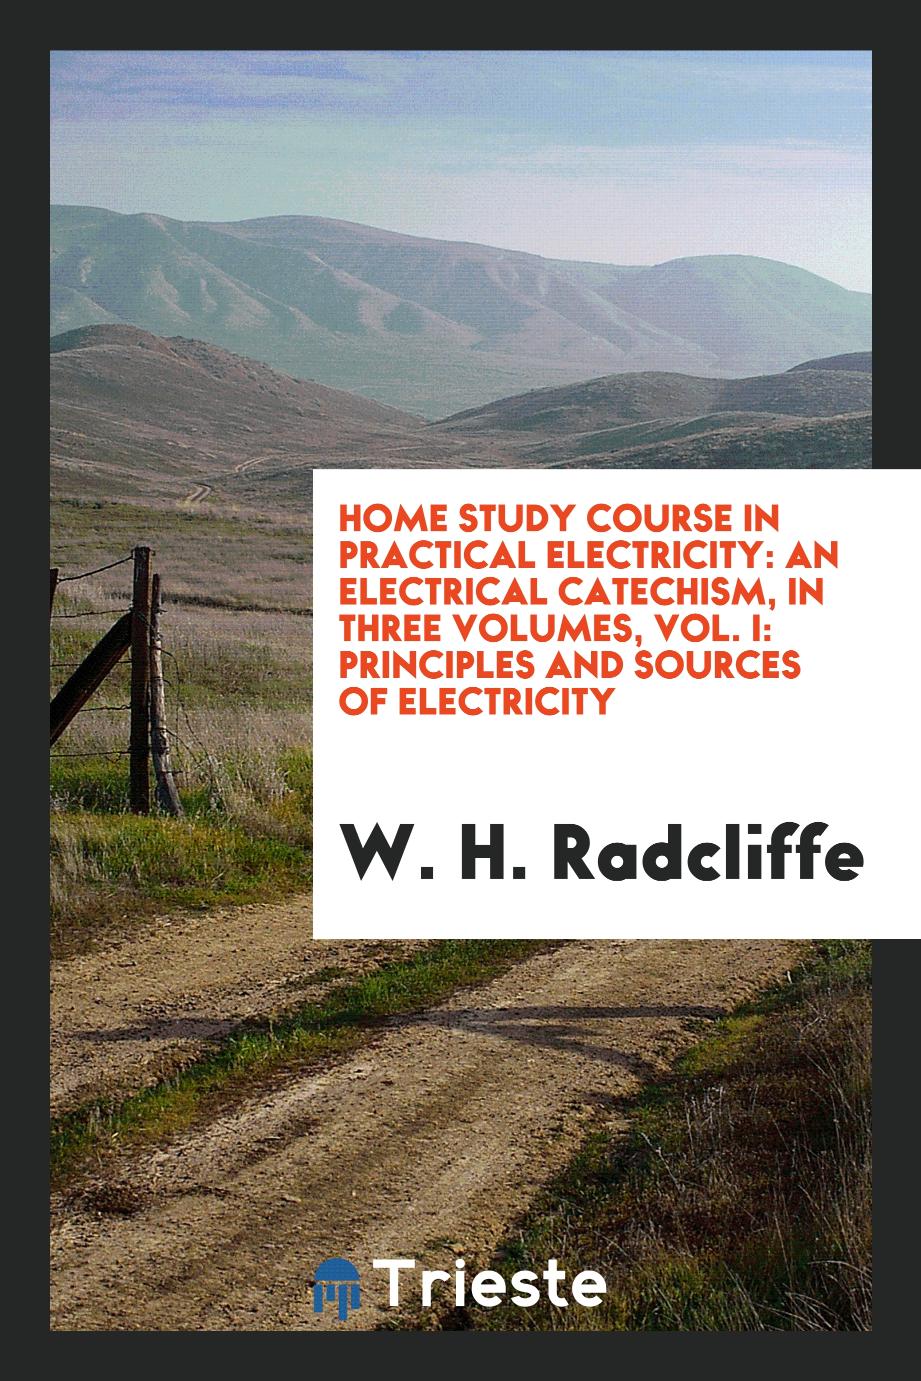 Home Study Course in Practical Electricity: An Electrical Catechism, in Three Volumes, Vol. I: Principles and Sources of Electricity